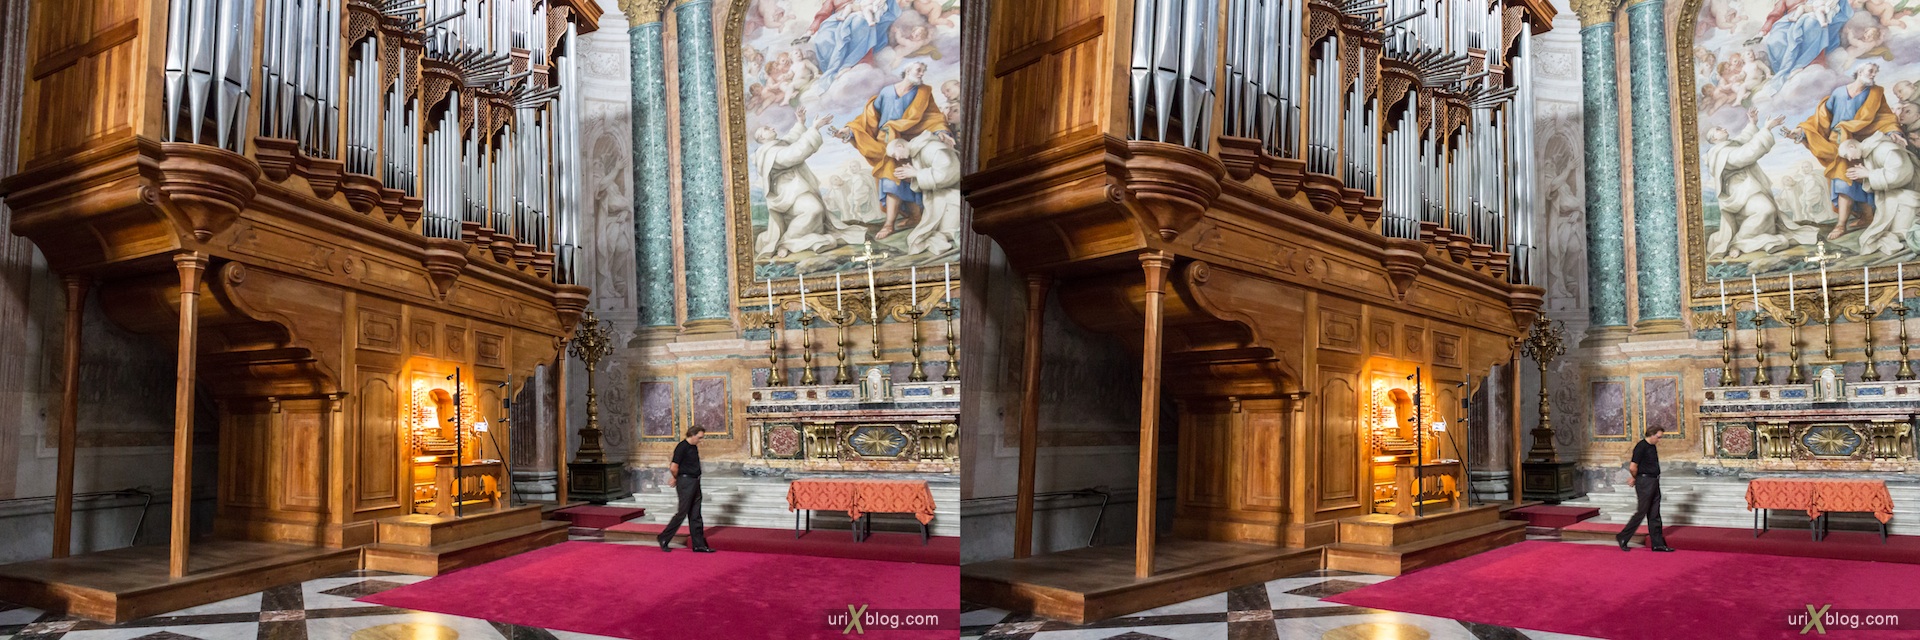 2012, Santa Maria degli Angeli church, Rome, Italy, cathedral, monastery, Christianity, Catholicism, 3D, stereo pair, cross-eyed, crossview, cross view stereo pair